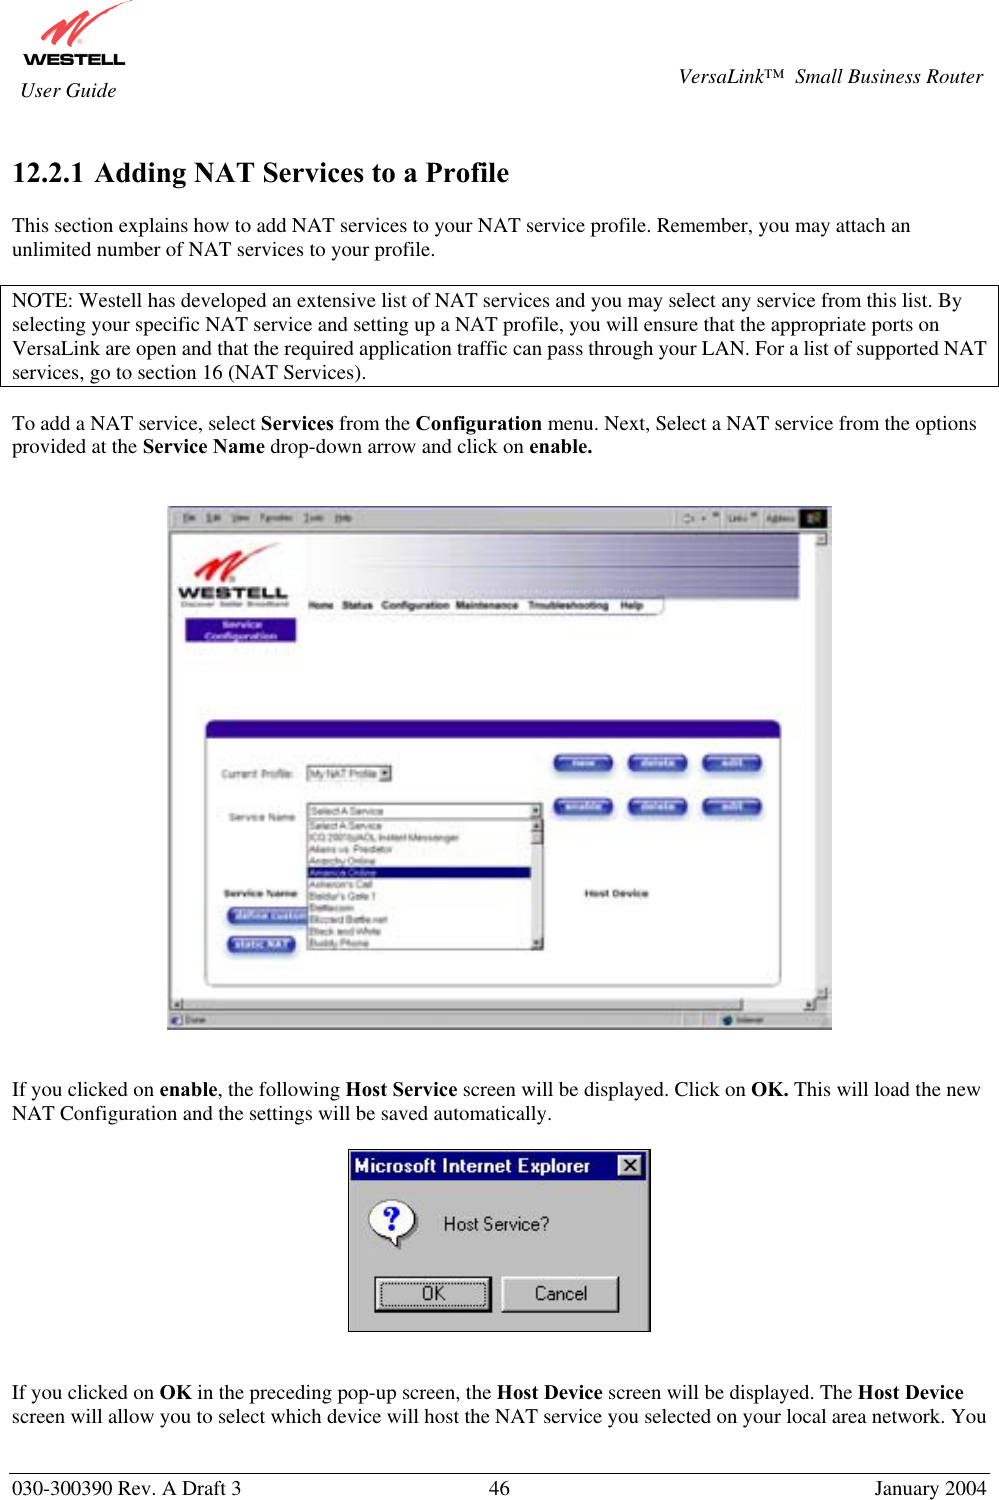       030-300390 Rev. A Draft 3  46  January 2004  VersaLink™  Small Business Router  User Guide  12.2.1  Adding NAT Services to a Profile  This section explains how to add NAT services to your NAT service profile. Remember, you may attach an unlimited number of NAT services to your profile.   NOTE: Westell has developed an extensive list of NAT services and you may select any service from this list. By selecting your specific NAT service and setting up a NAT profile, you will ensure that the appropriate ports on VersaLink are open and that the required application traffic can pass through your LAN. For a list of supported NAT services, go to section 16 (NAT Services).  To add a NAT service, select Services from the Configuration menu. Next, Select a NAT service from the options provided at the Service Name drop-down arrow and click on enable.       If you clicked on enable, the following Host Service screen will be displayed. Click on OK. This will load the new NAT Configuration and the settings will be saved automatically.            If you clicked on OK in the preceding pop-up screen, the Host Device screen will be displayed. The Host Device screen will allow you to select which device will host the NAT service you selected on your local area network. You 